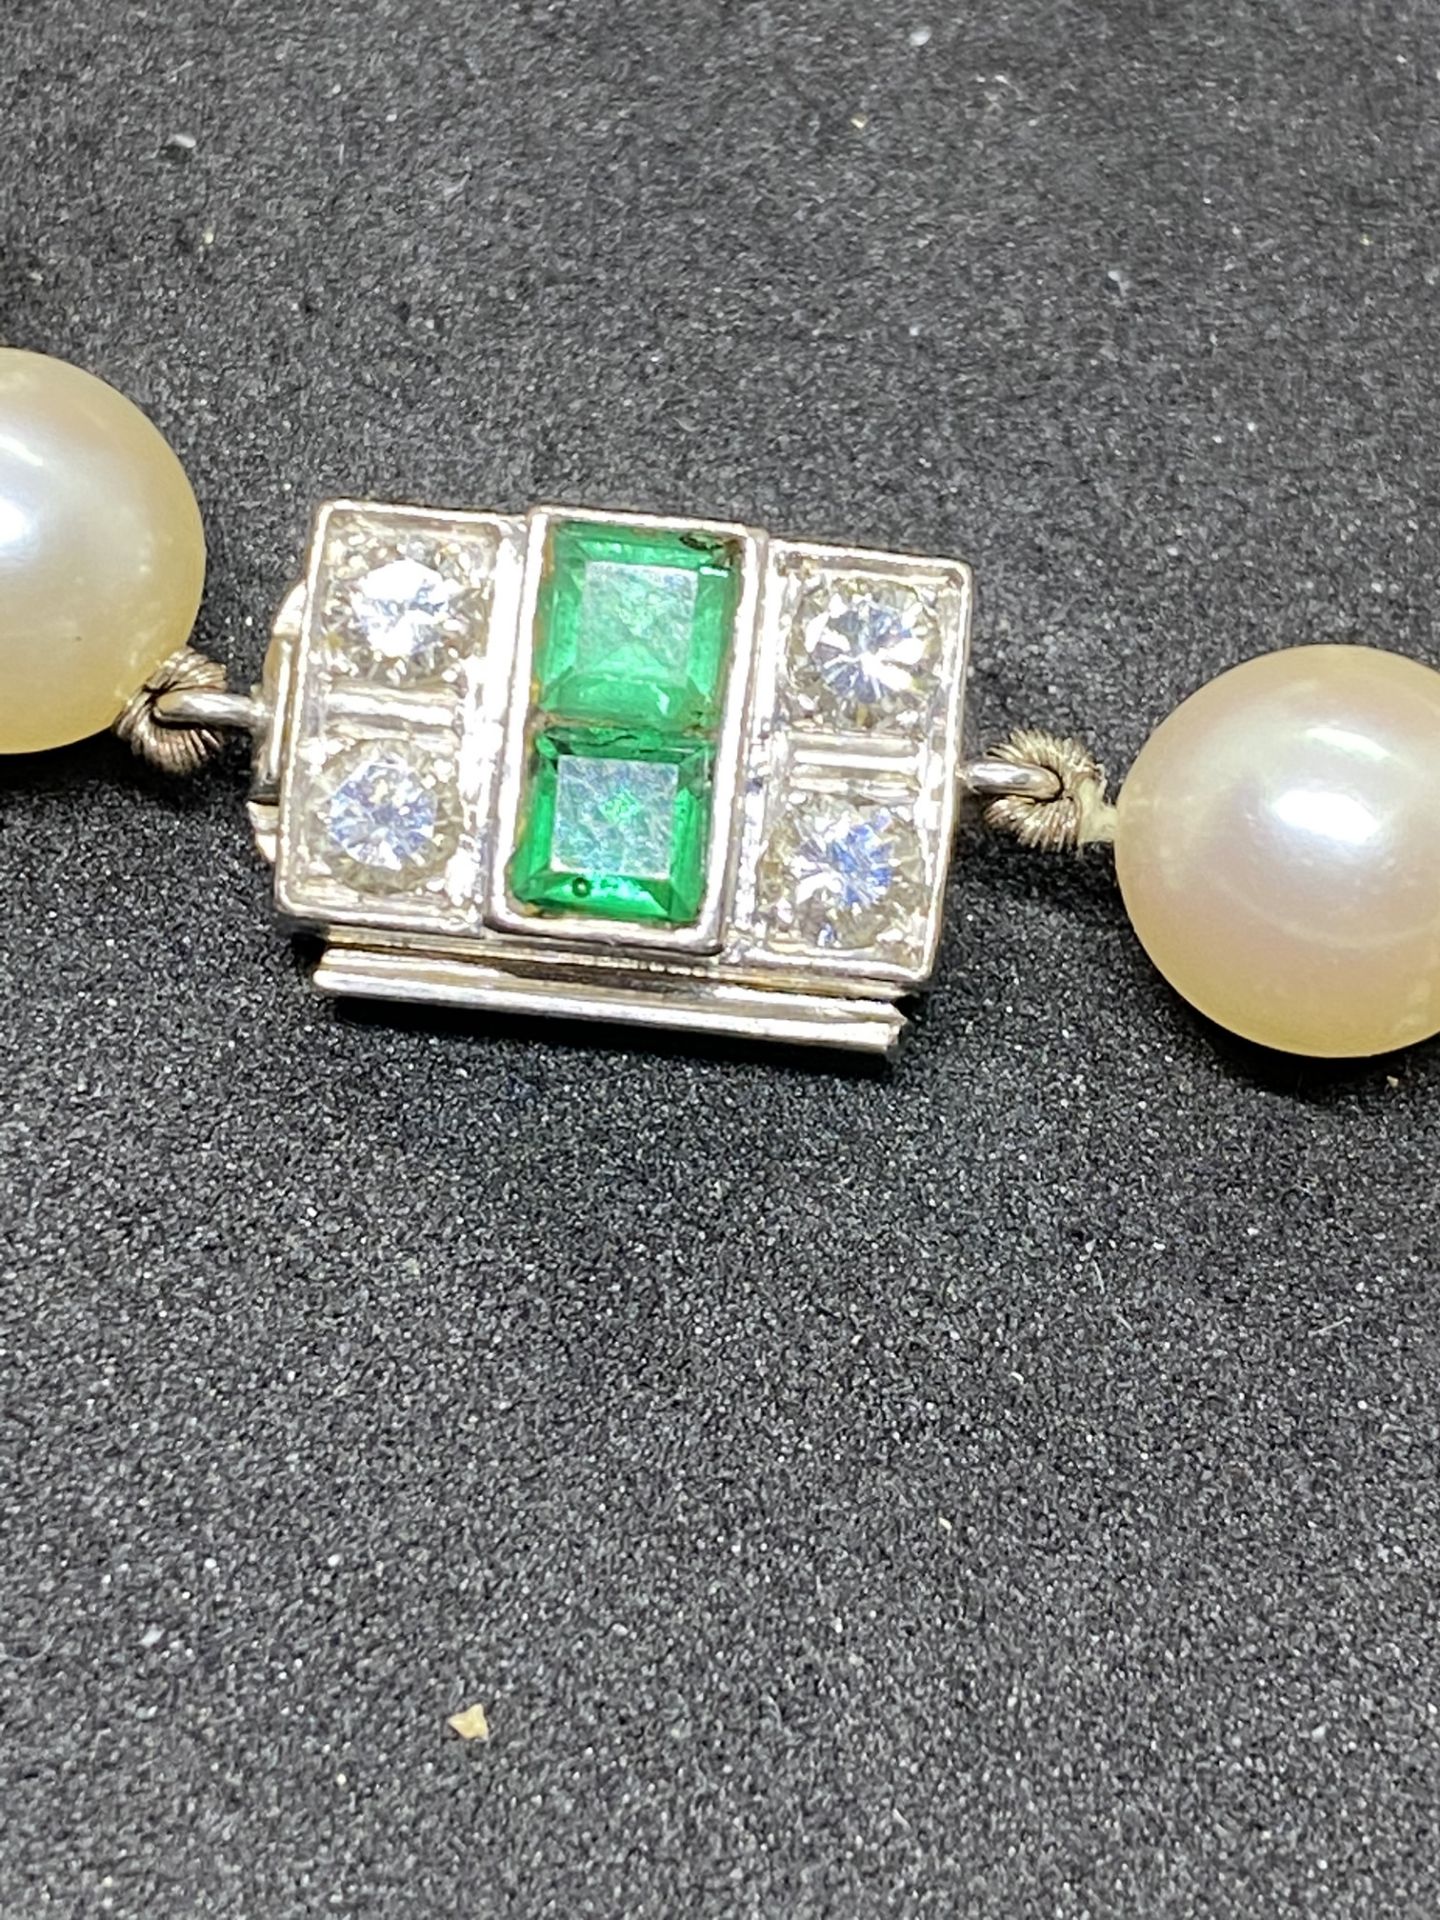 VINTAGE PEARL NECKLACE WITH WHITE METAL CLASP SET WITH EMERALDS & DIAMONDS (TESTED AS WHITE GOLD) - Image 5 of 8